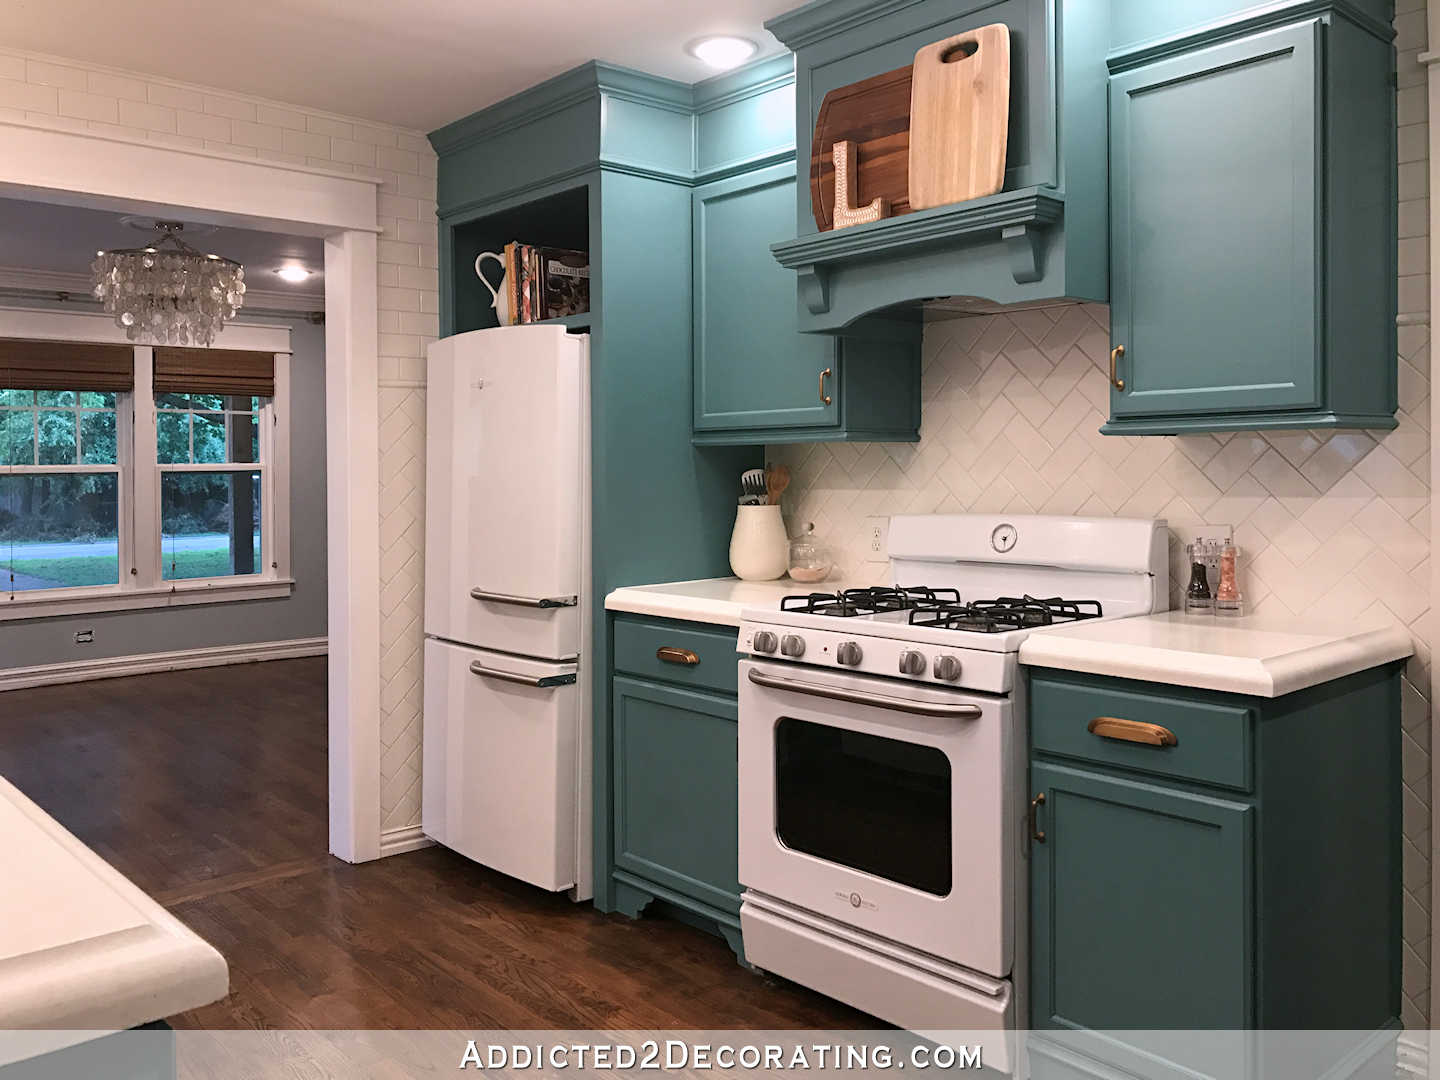 teal kitchen - refrigerator and range wall from back of kitchen